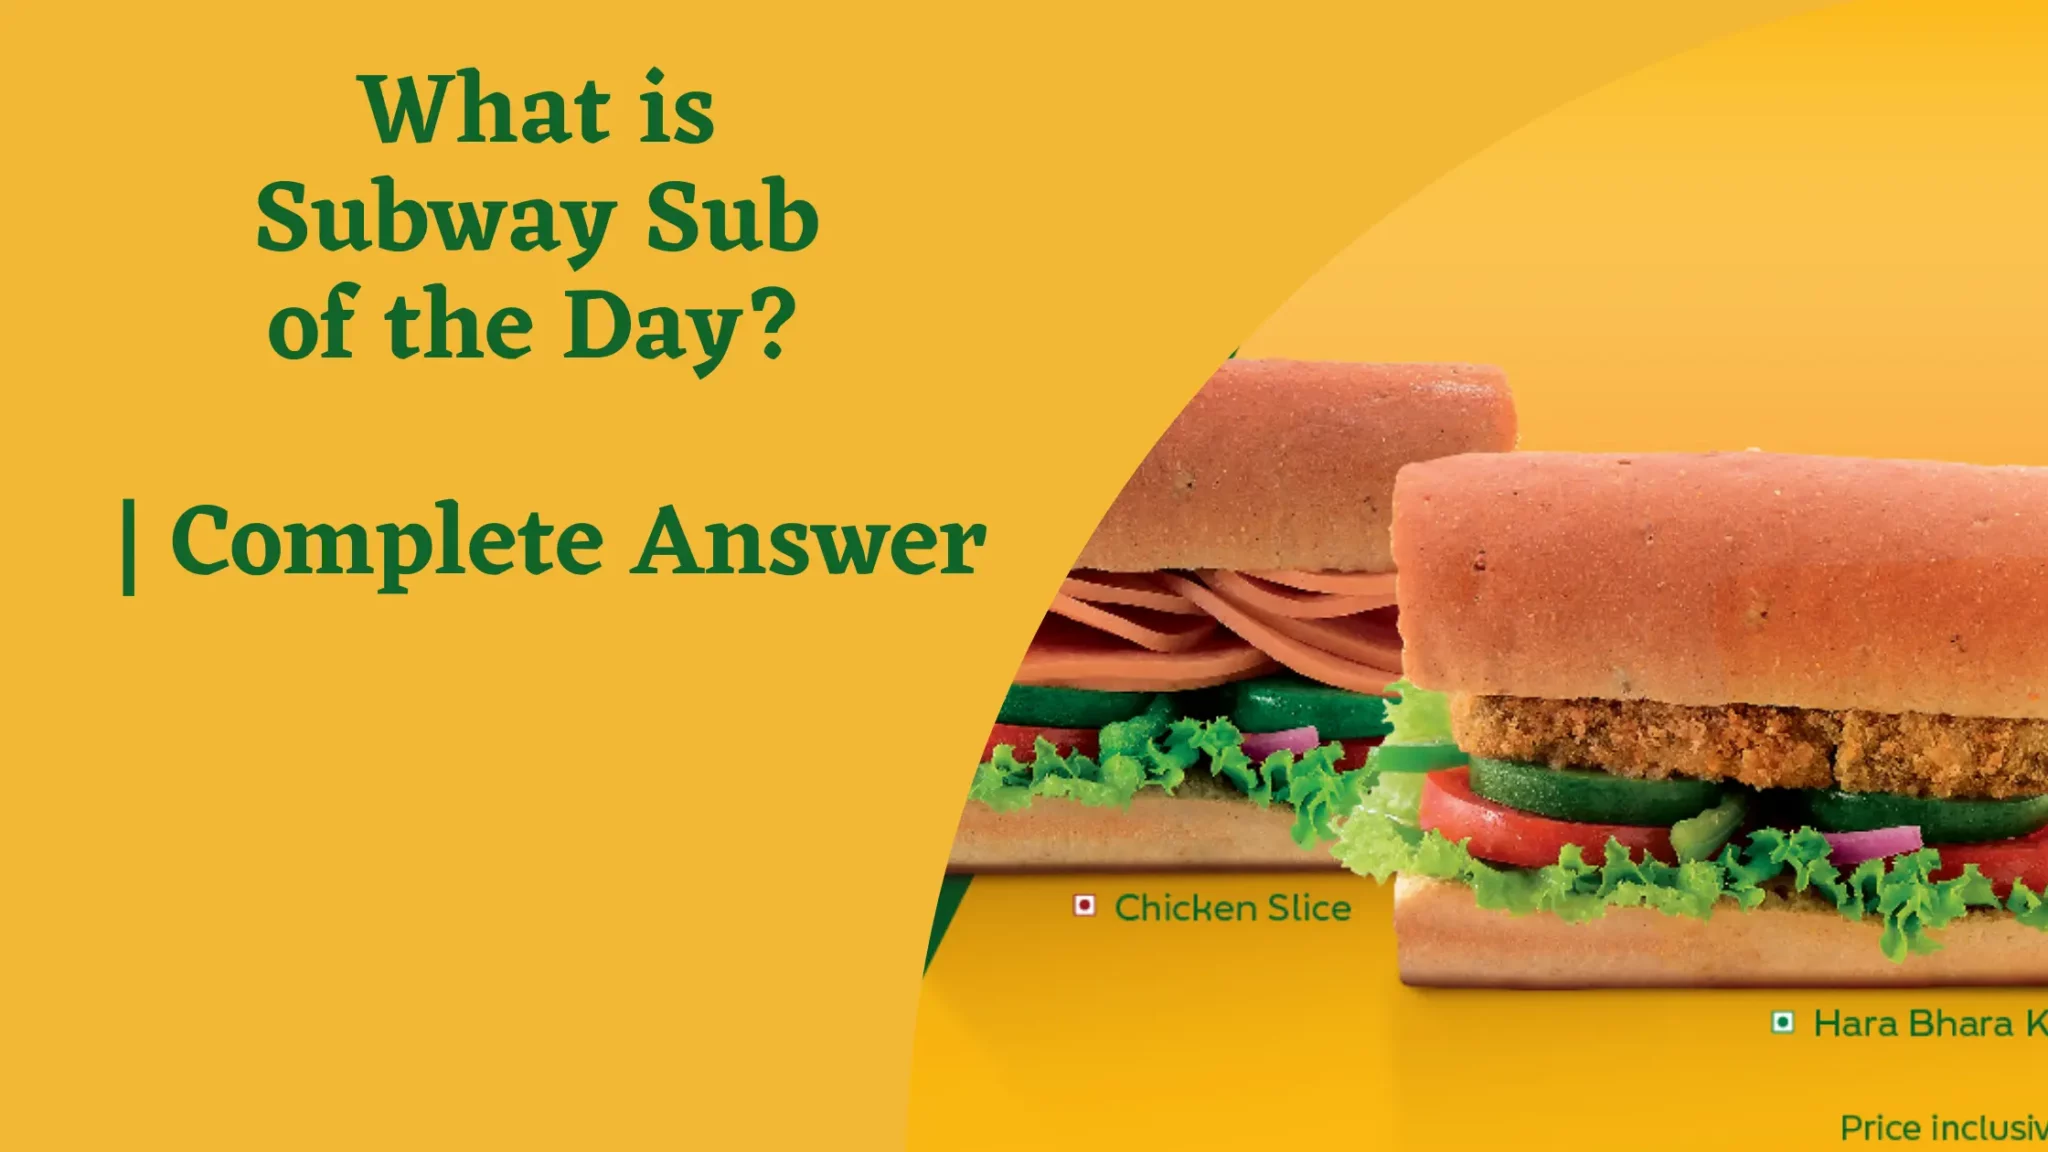 What is Subway Sub of the Day?